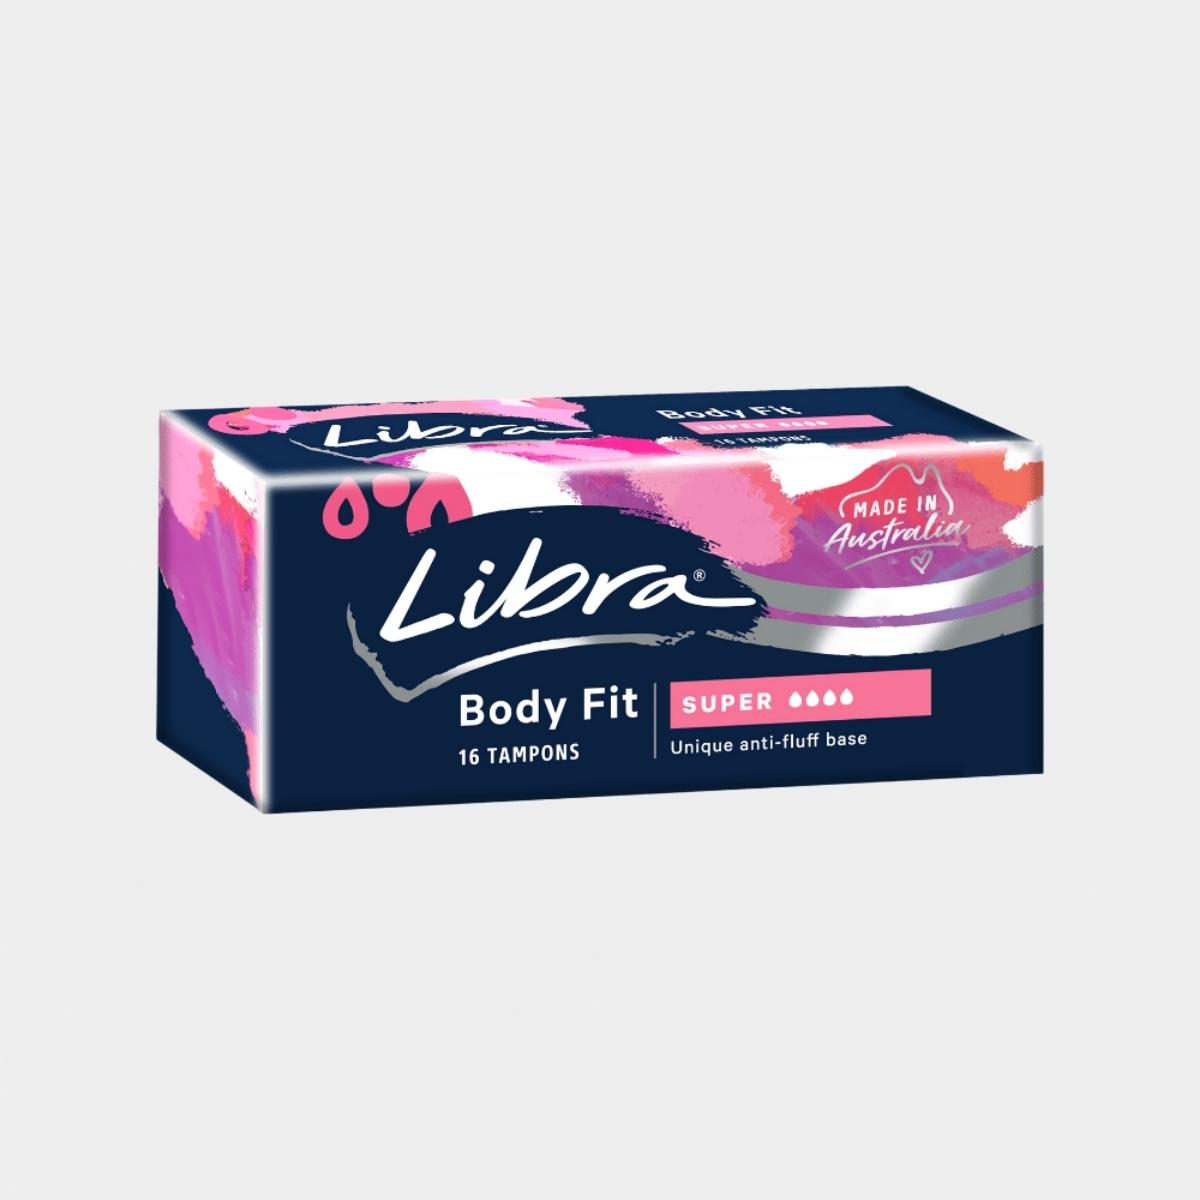 Body Fit Super Tampons